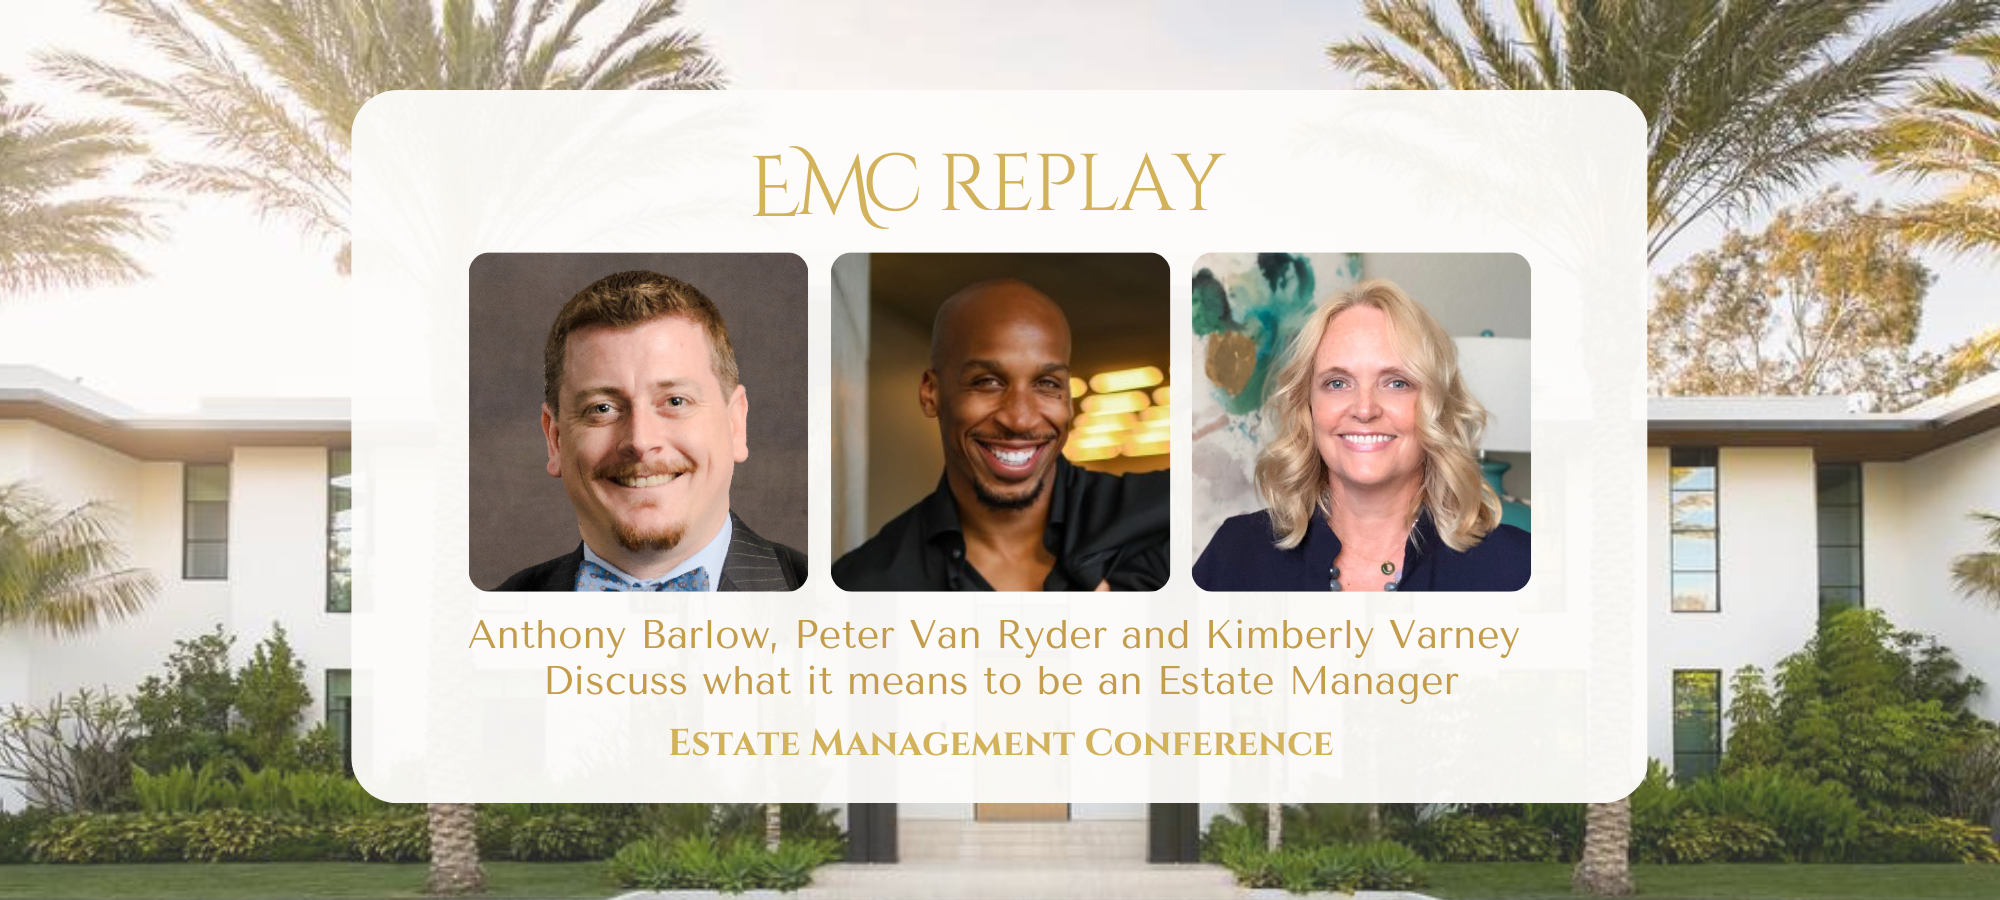 What is an Estate Manager